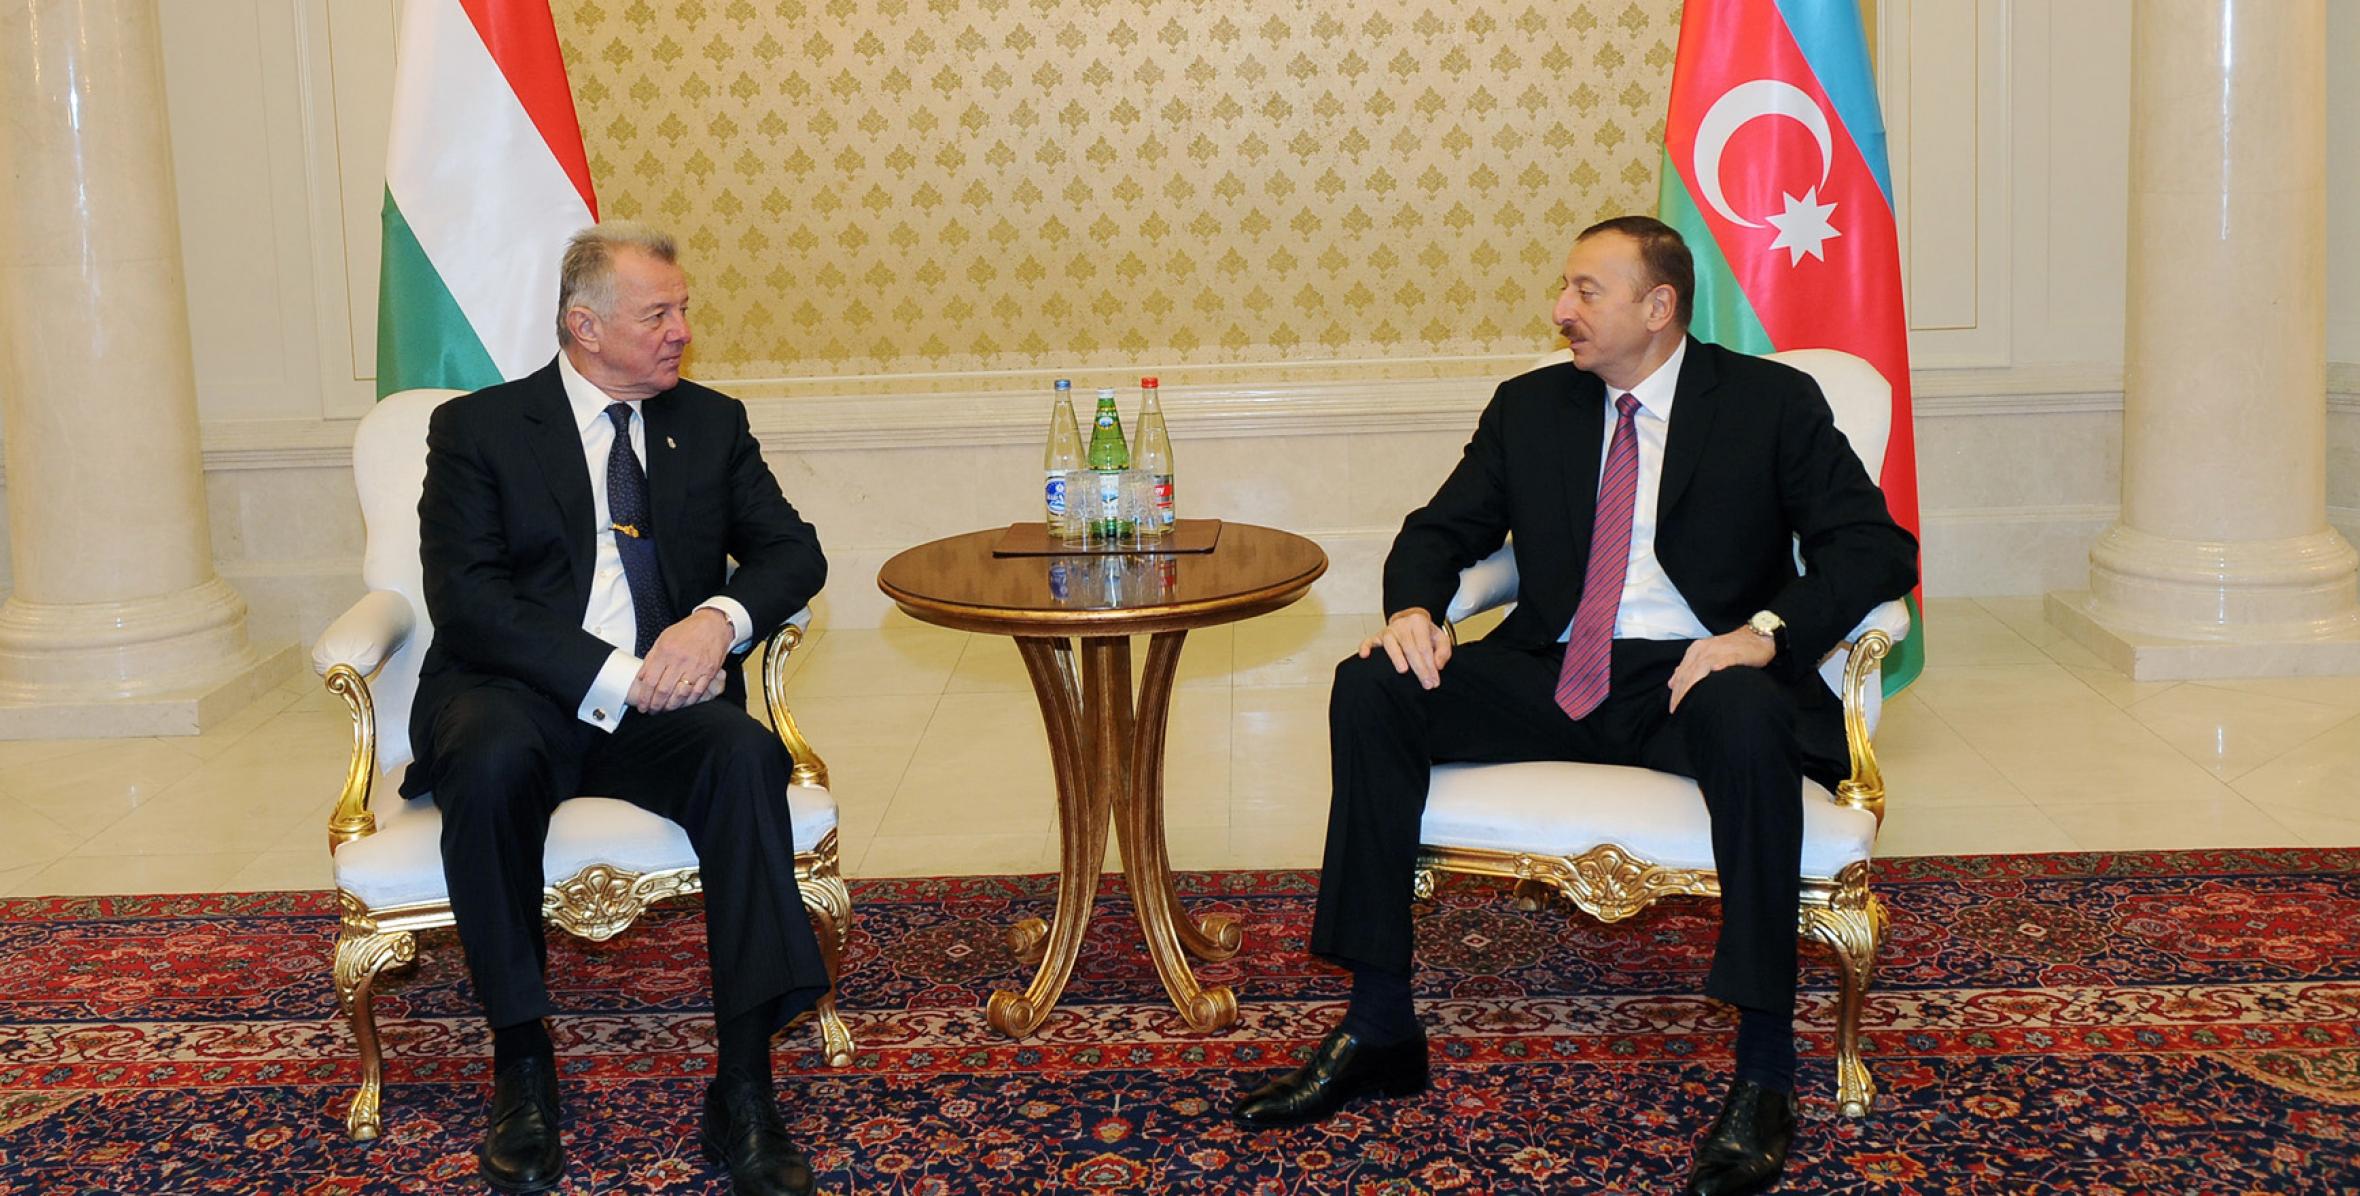 Ilham Aliyev and Hungarian President Pal Schmitt held a private meeting